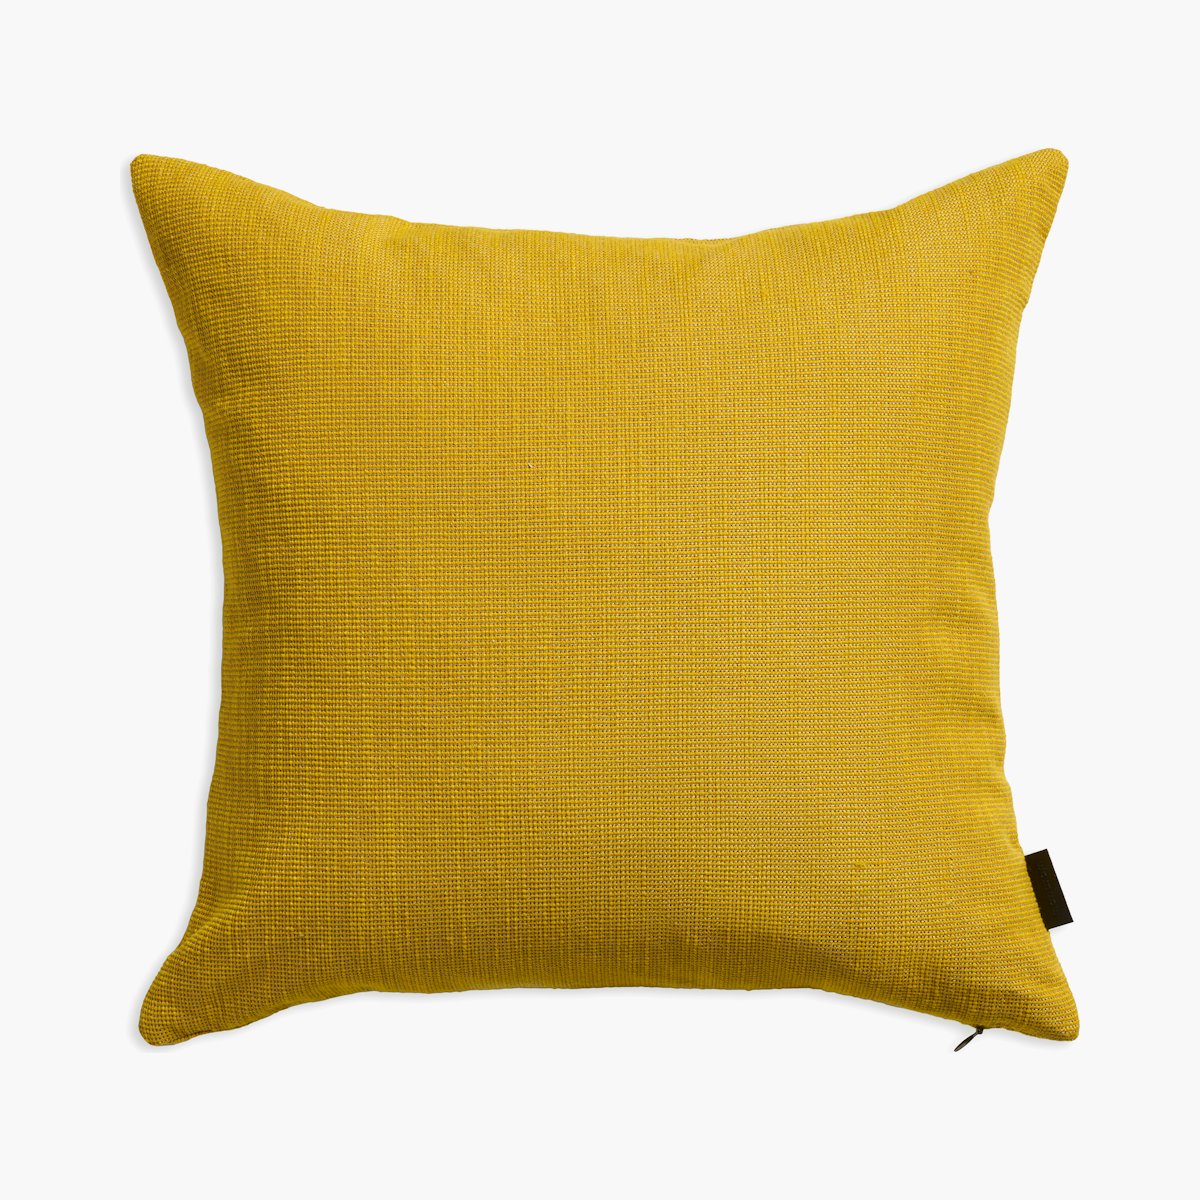 Paul Smith Ribbed Weave Indoor/Outdoor Pillow